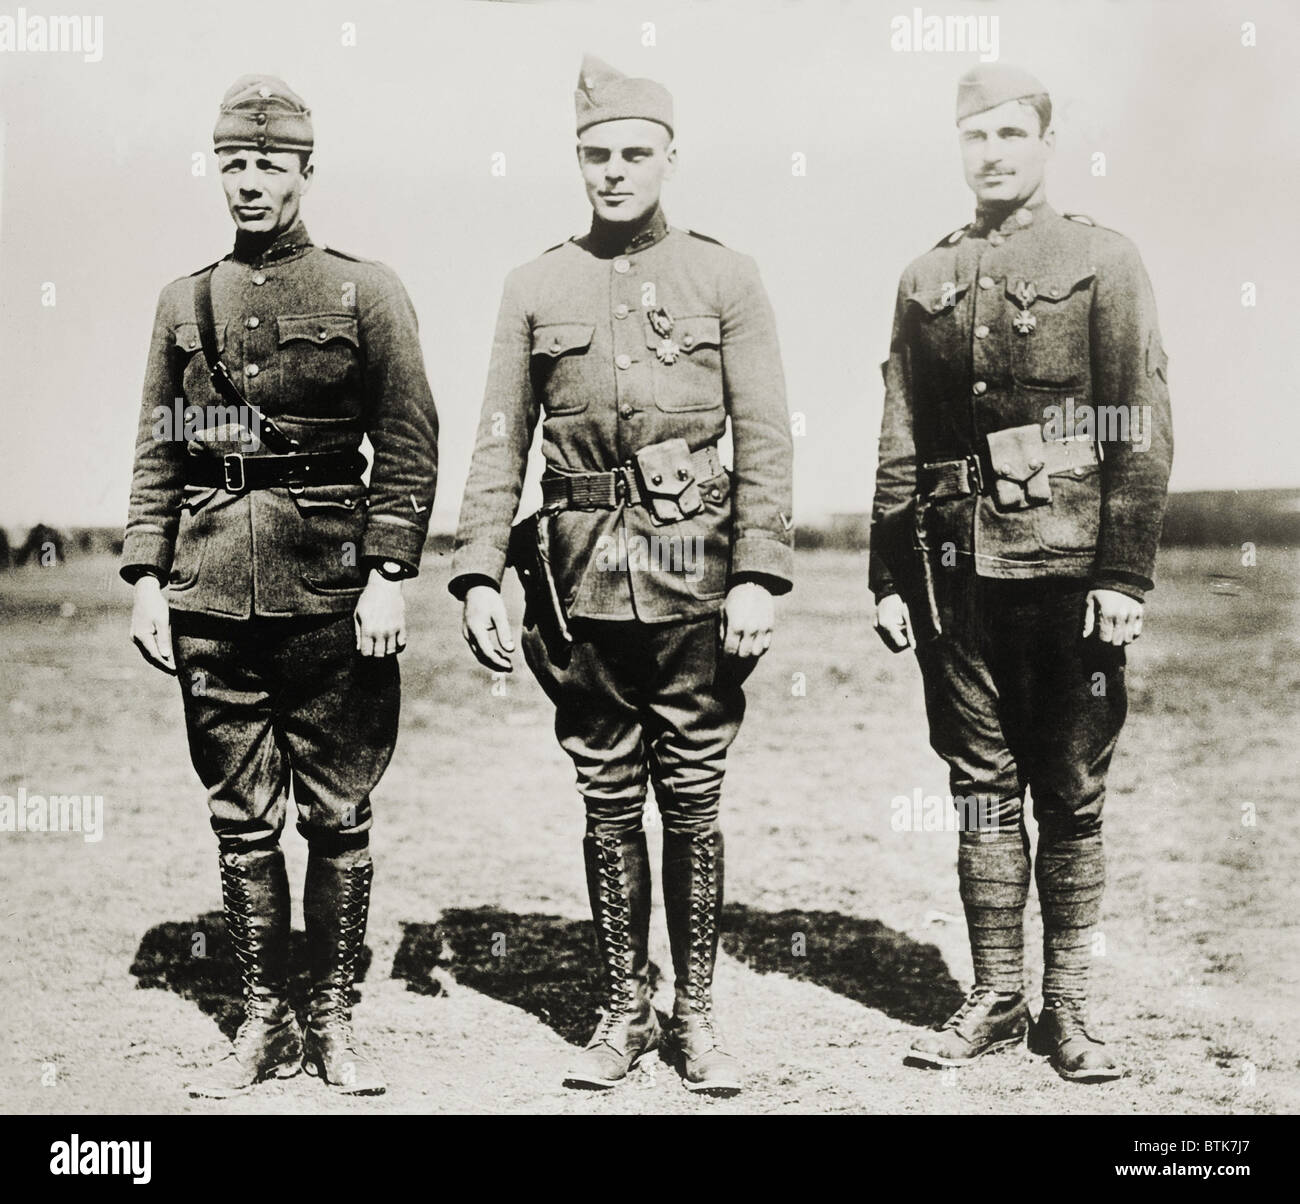 Major Theodore Roosevelt Jr. with two other soldiers, Lt. C.R. Holmes, and Sgt. J.A. Murphy during World War I. He would also serve with distinction as a Brigadier General in World War II. Ca. 1918. Stock Photo